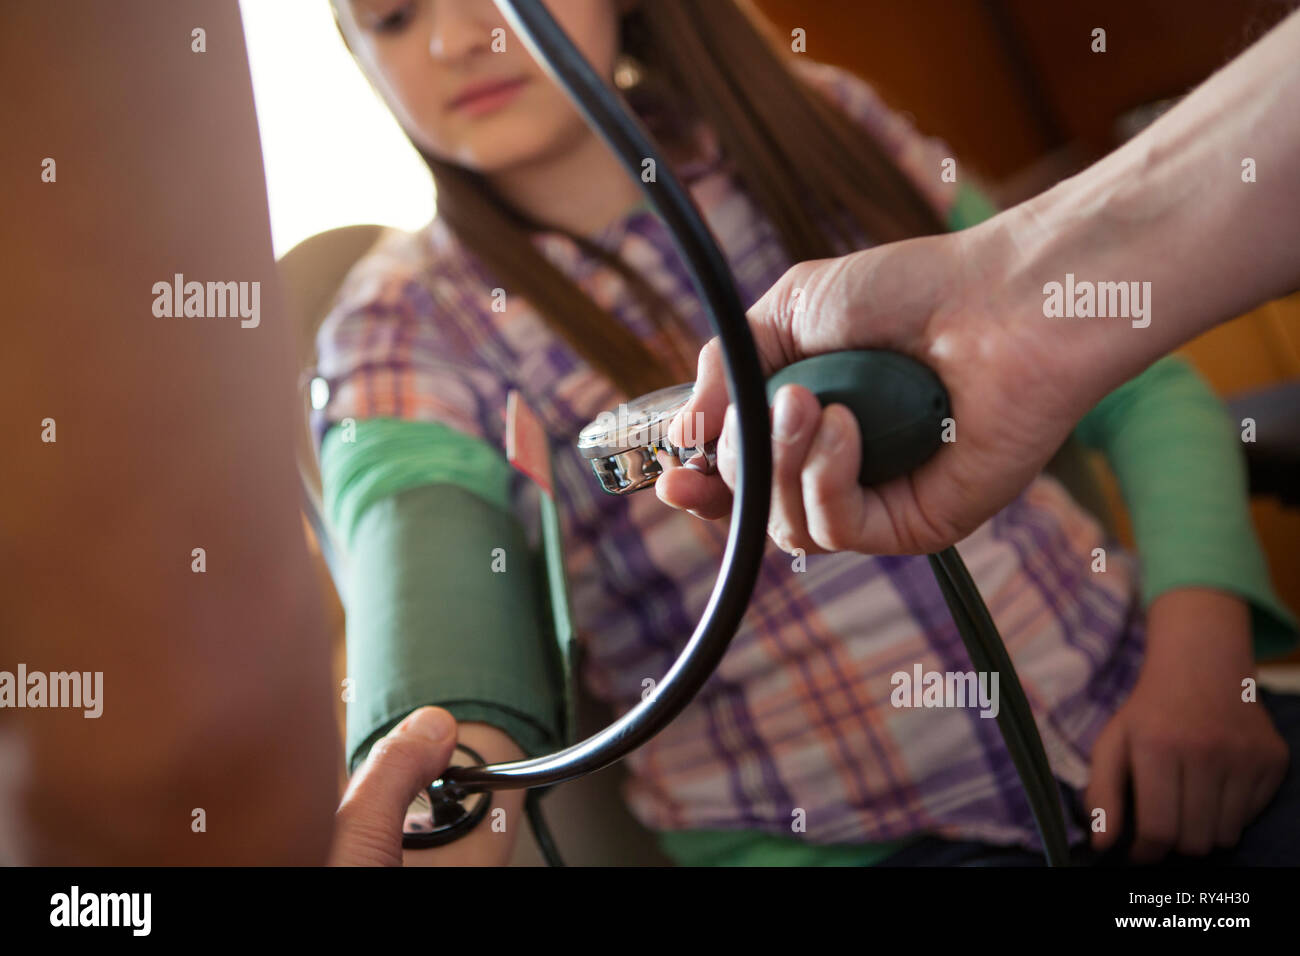 Doctor measuring a child's blood pressure Stock Photo